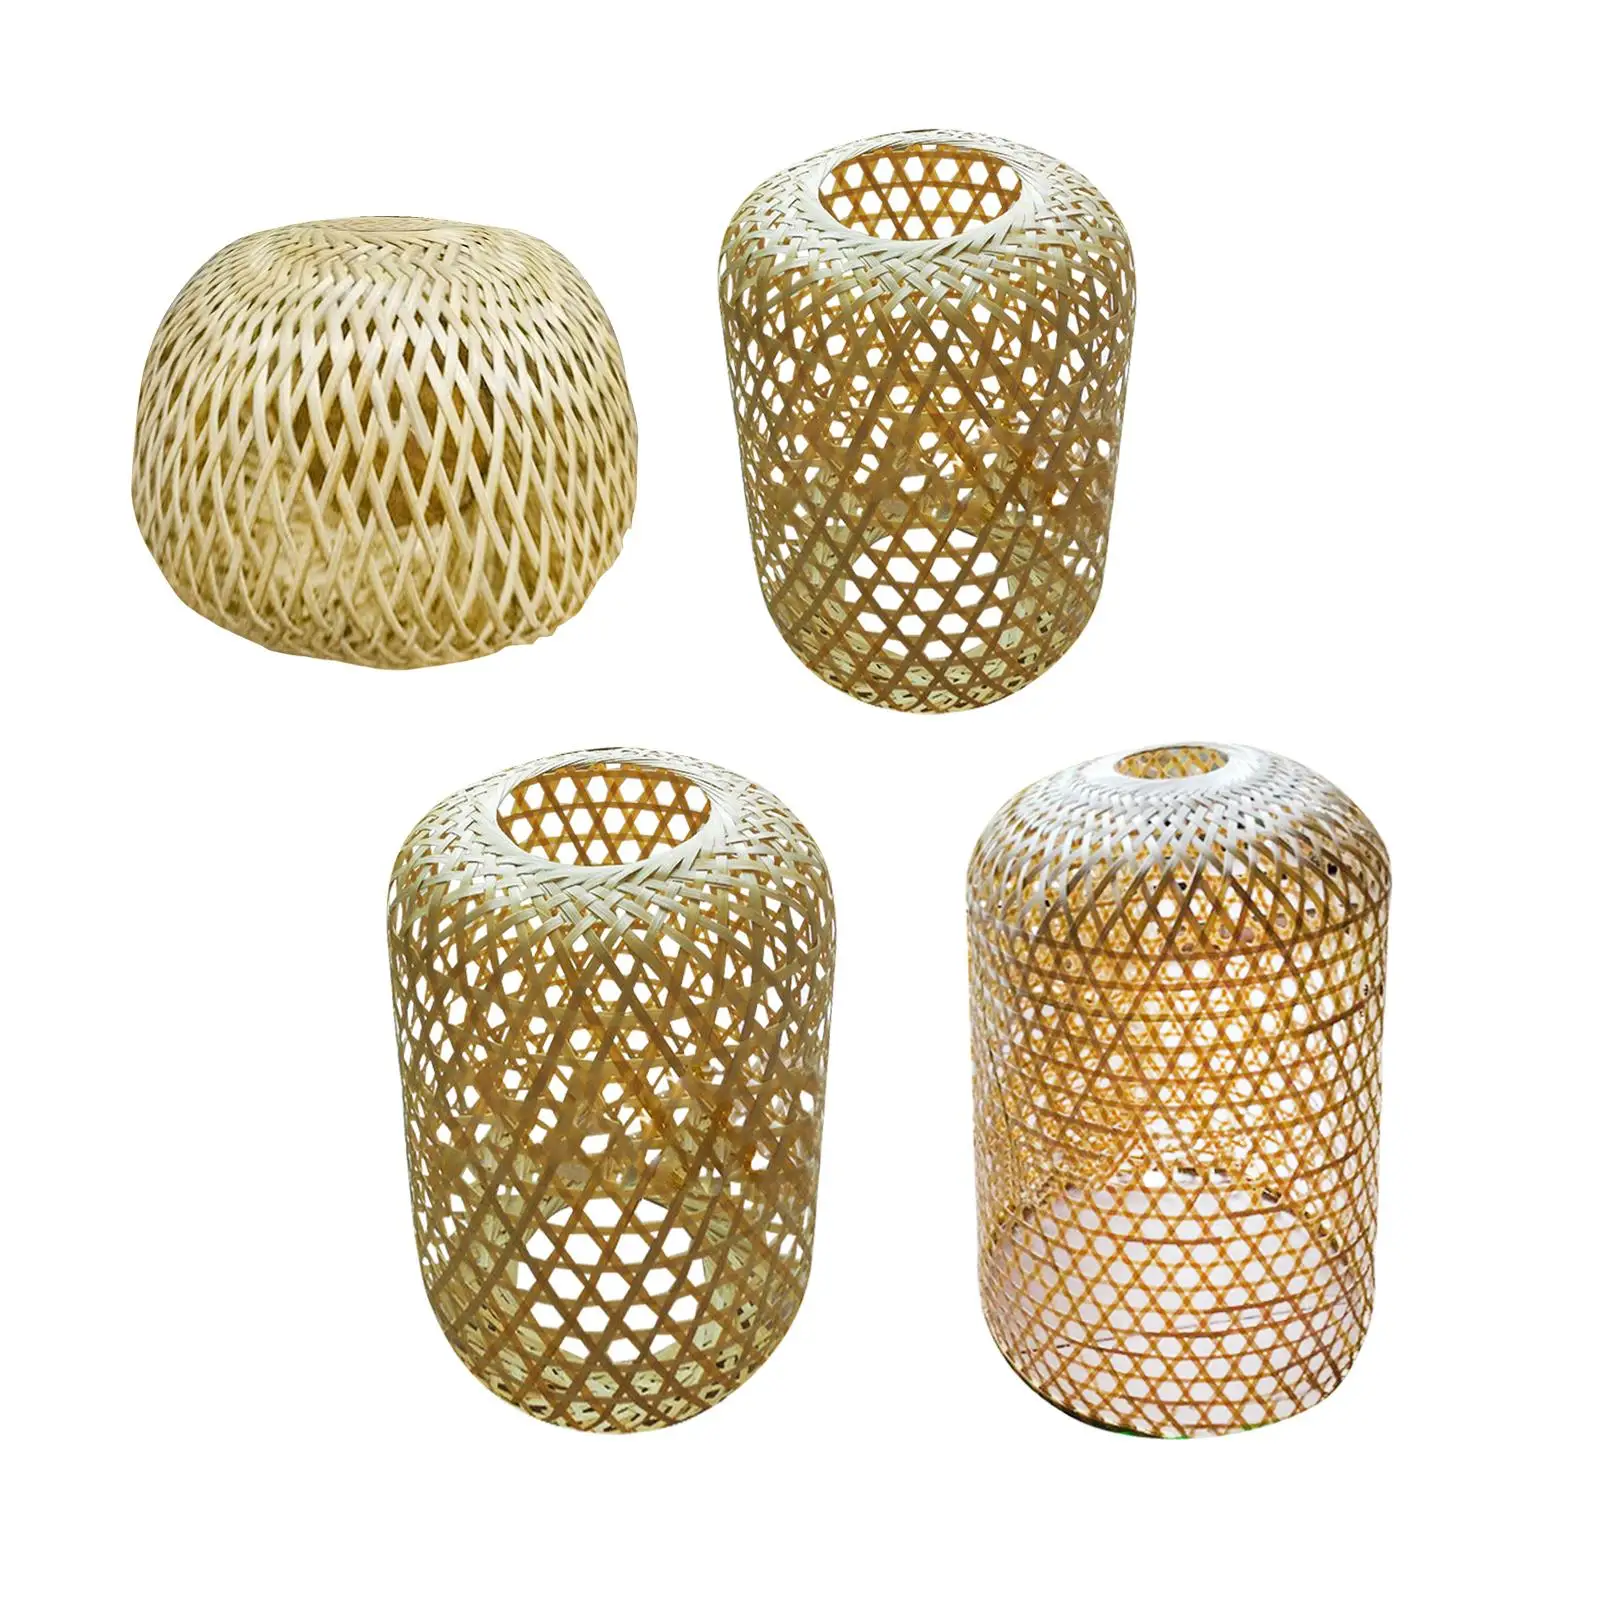 Weaving Bamboo Lamp Shade Pendant Light Cover Lantern Lamp Accessory for Home Decoration